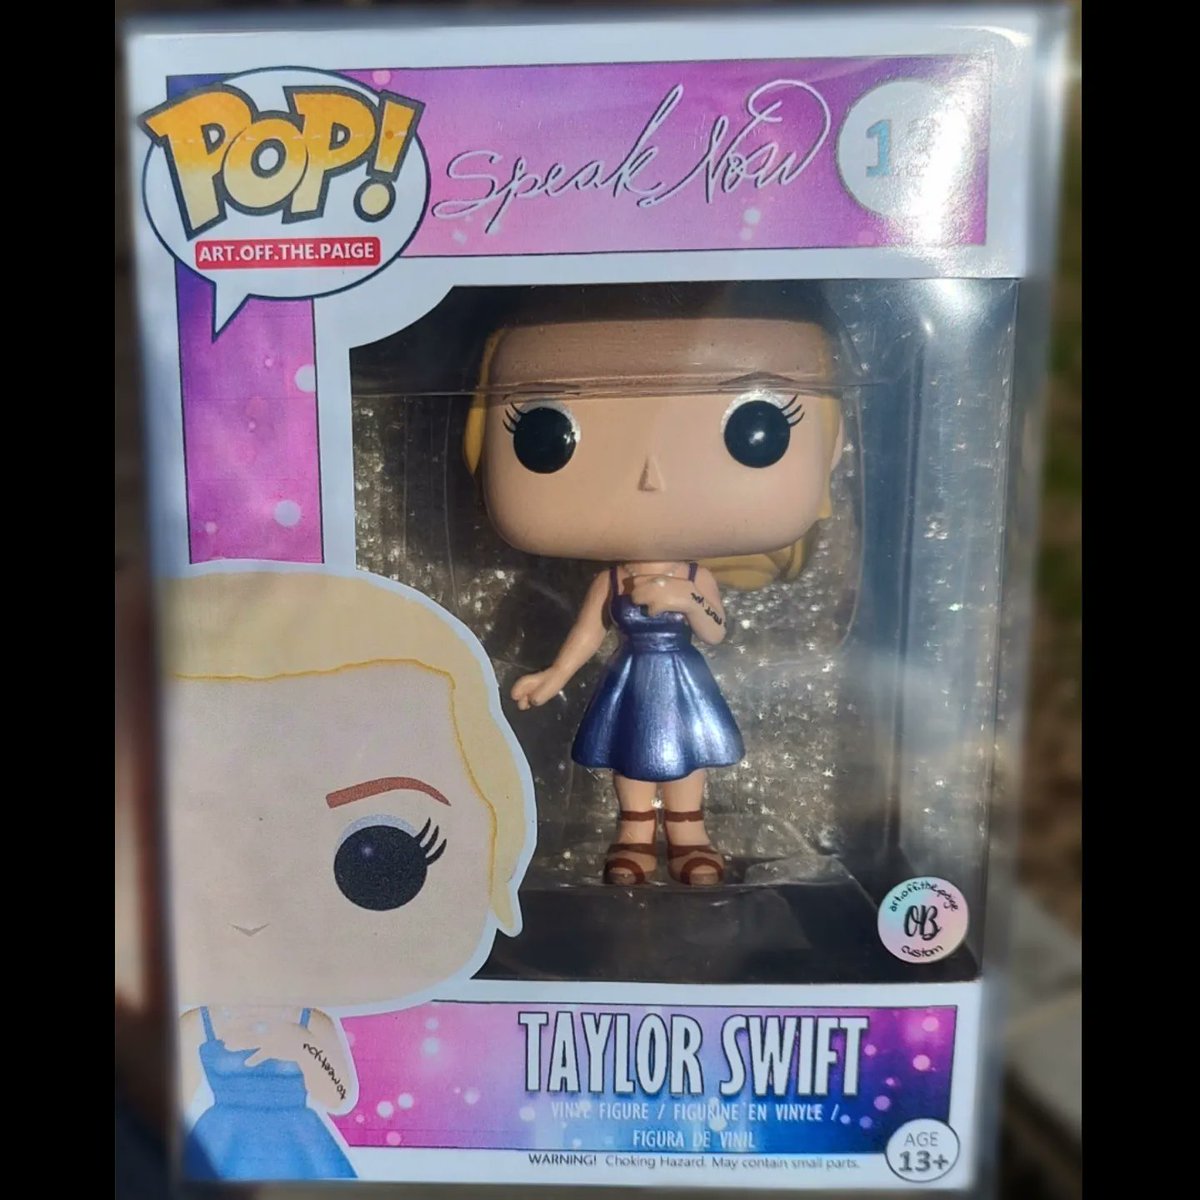 art.off.the.paige / Olivia on X: CUSTOM Taylor Swift Lover Cover Funko pop  💖 #taylor #